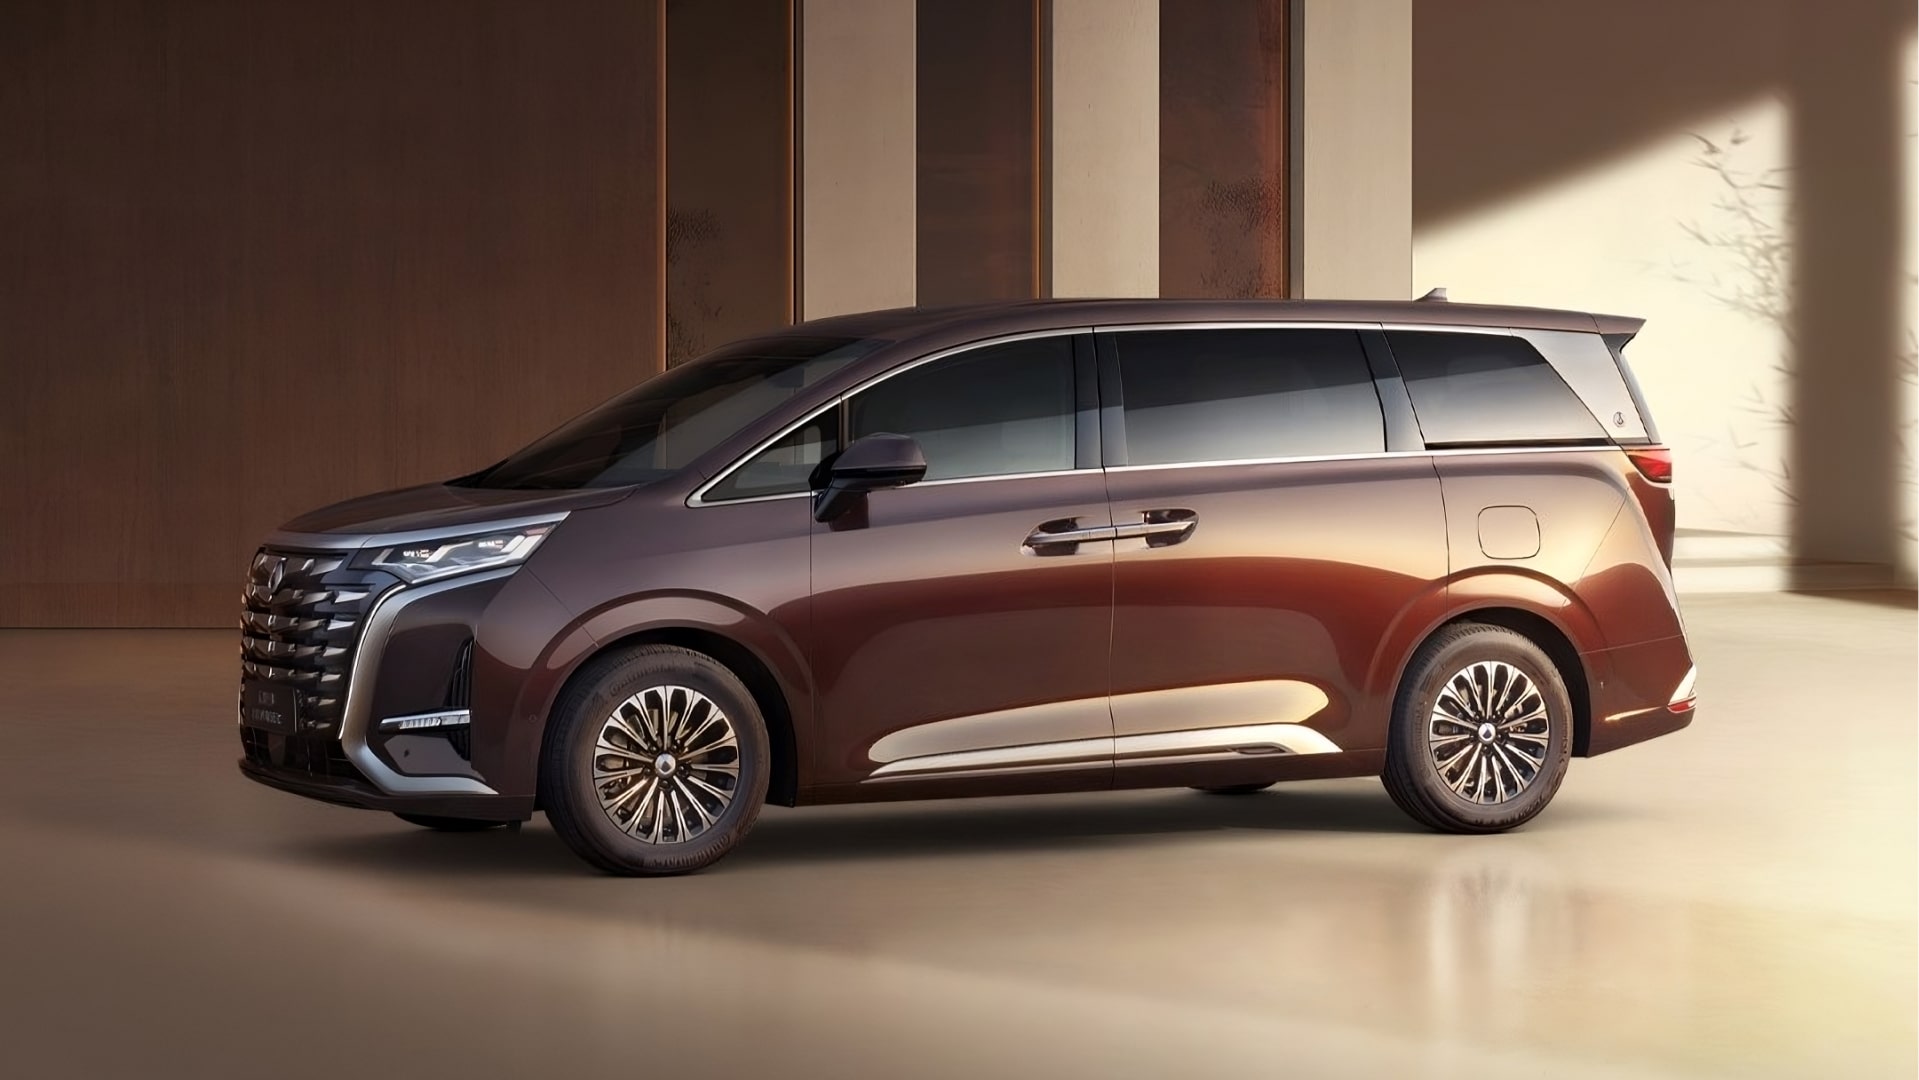 BYD refreshed China’s bestselling MPV Denza D9